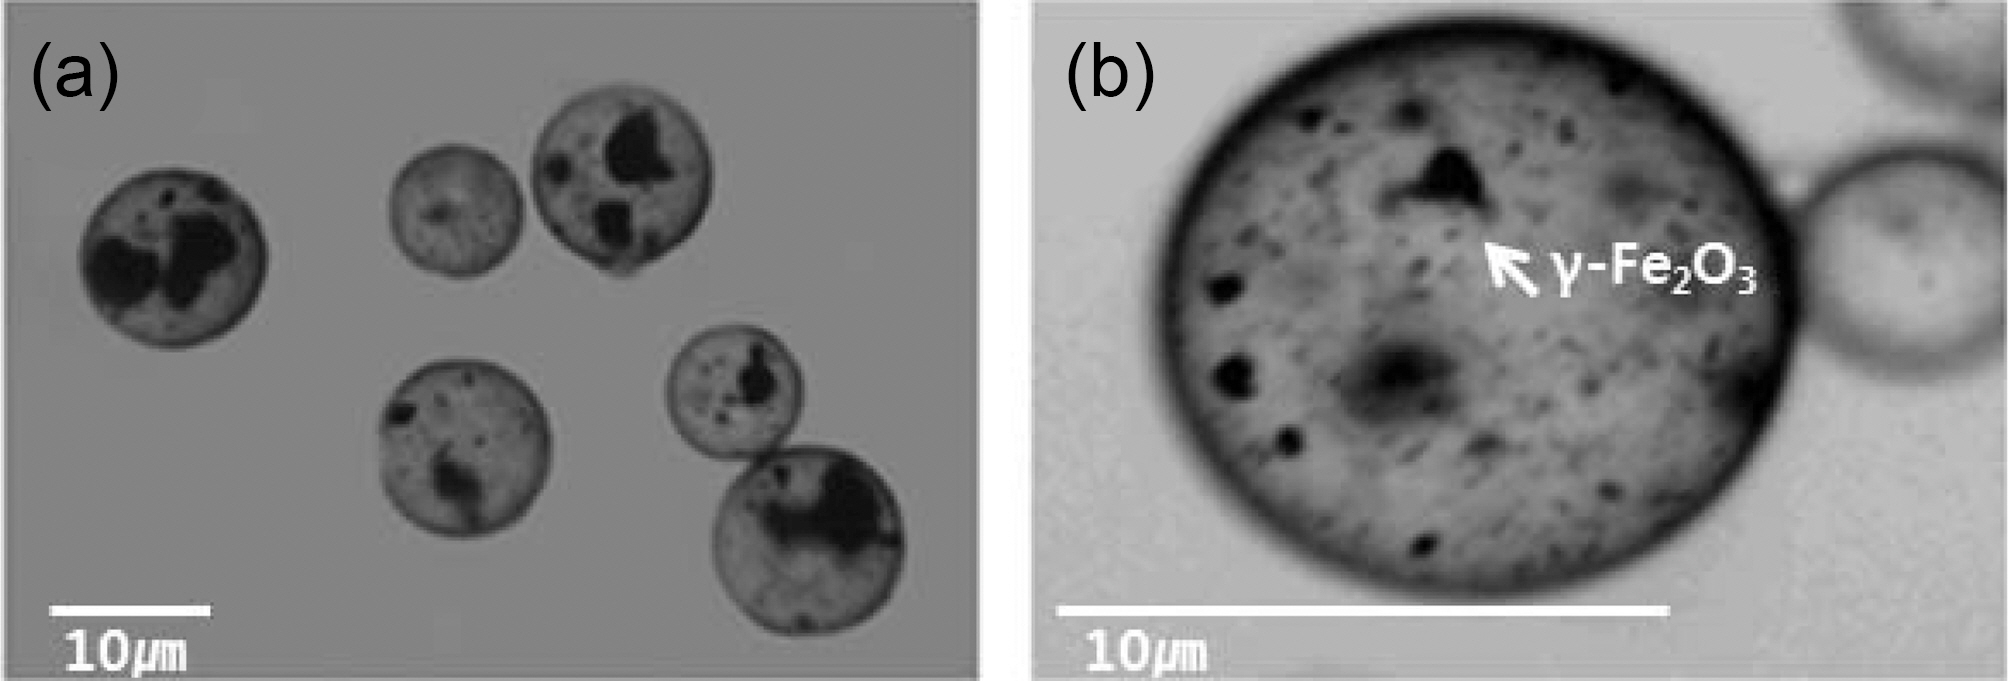 Optical microscope images of (a) γ-Fe2O3 microcapsules and (b) γ-Fe2O3 microcapsules with higher magnification.